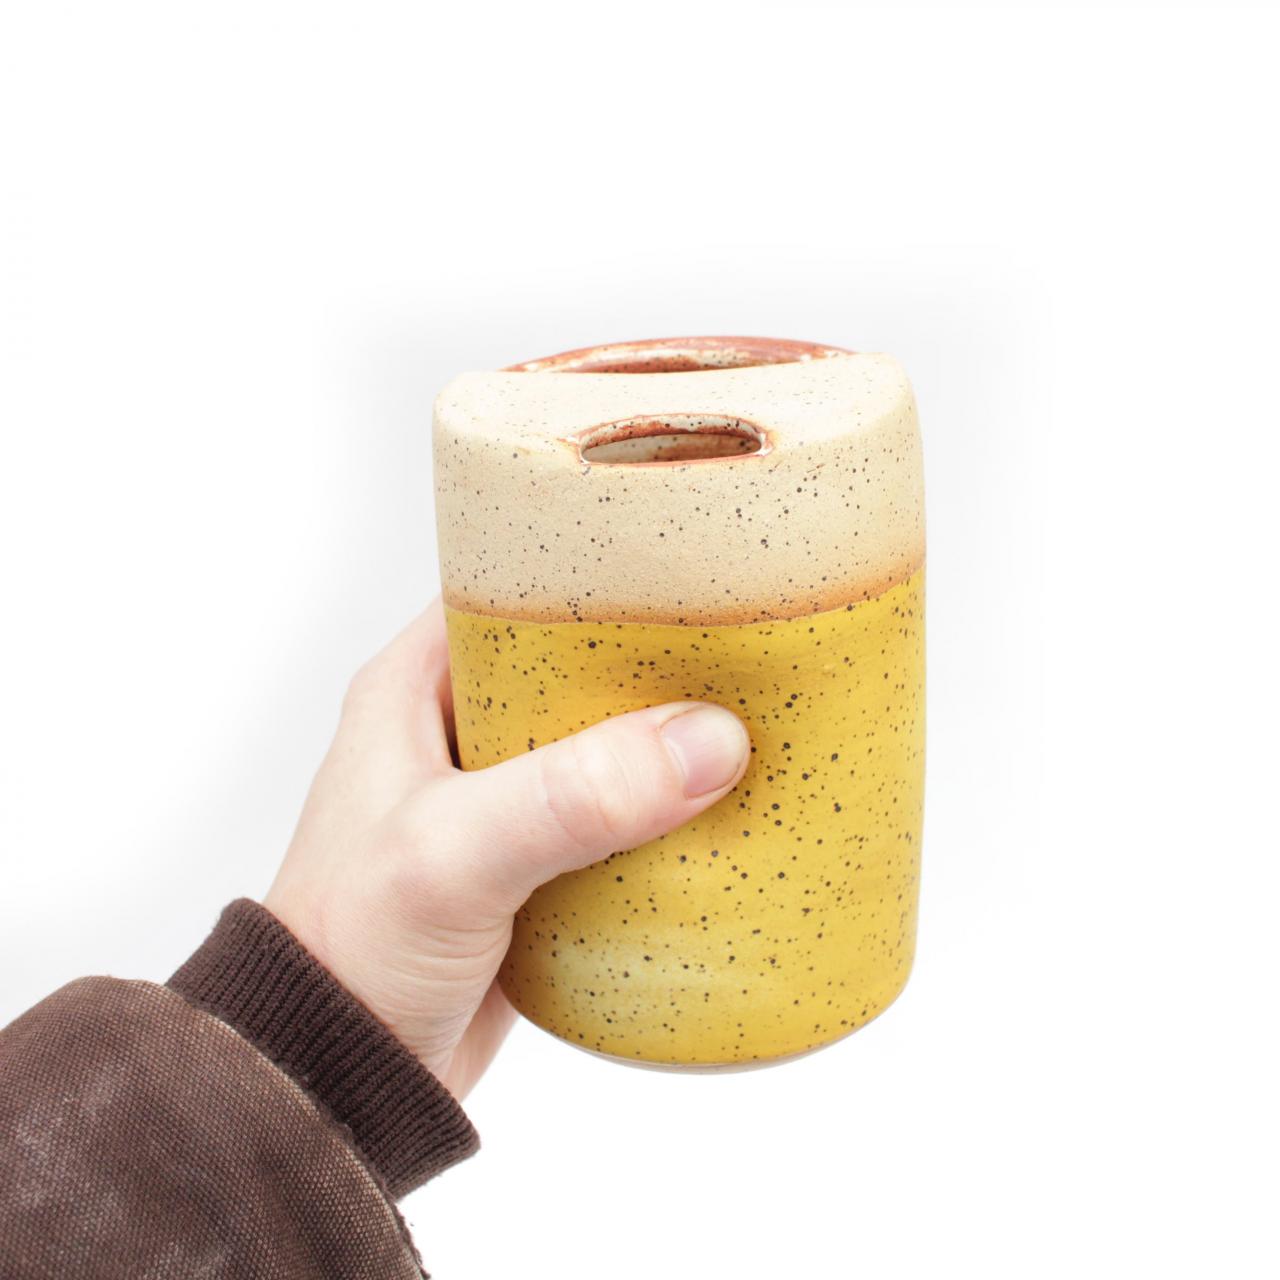 (pre-order) Bright Yellow Ceramic Travel Tumbler Sip-top To-go Cup | Texas Wheel Thrown Speckled Stoneware Pottery | Handmade Glaze | Coffee Tea